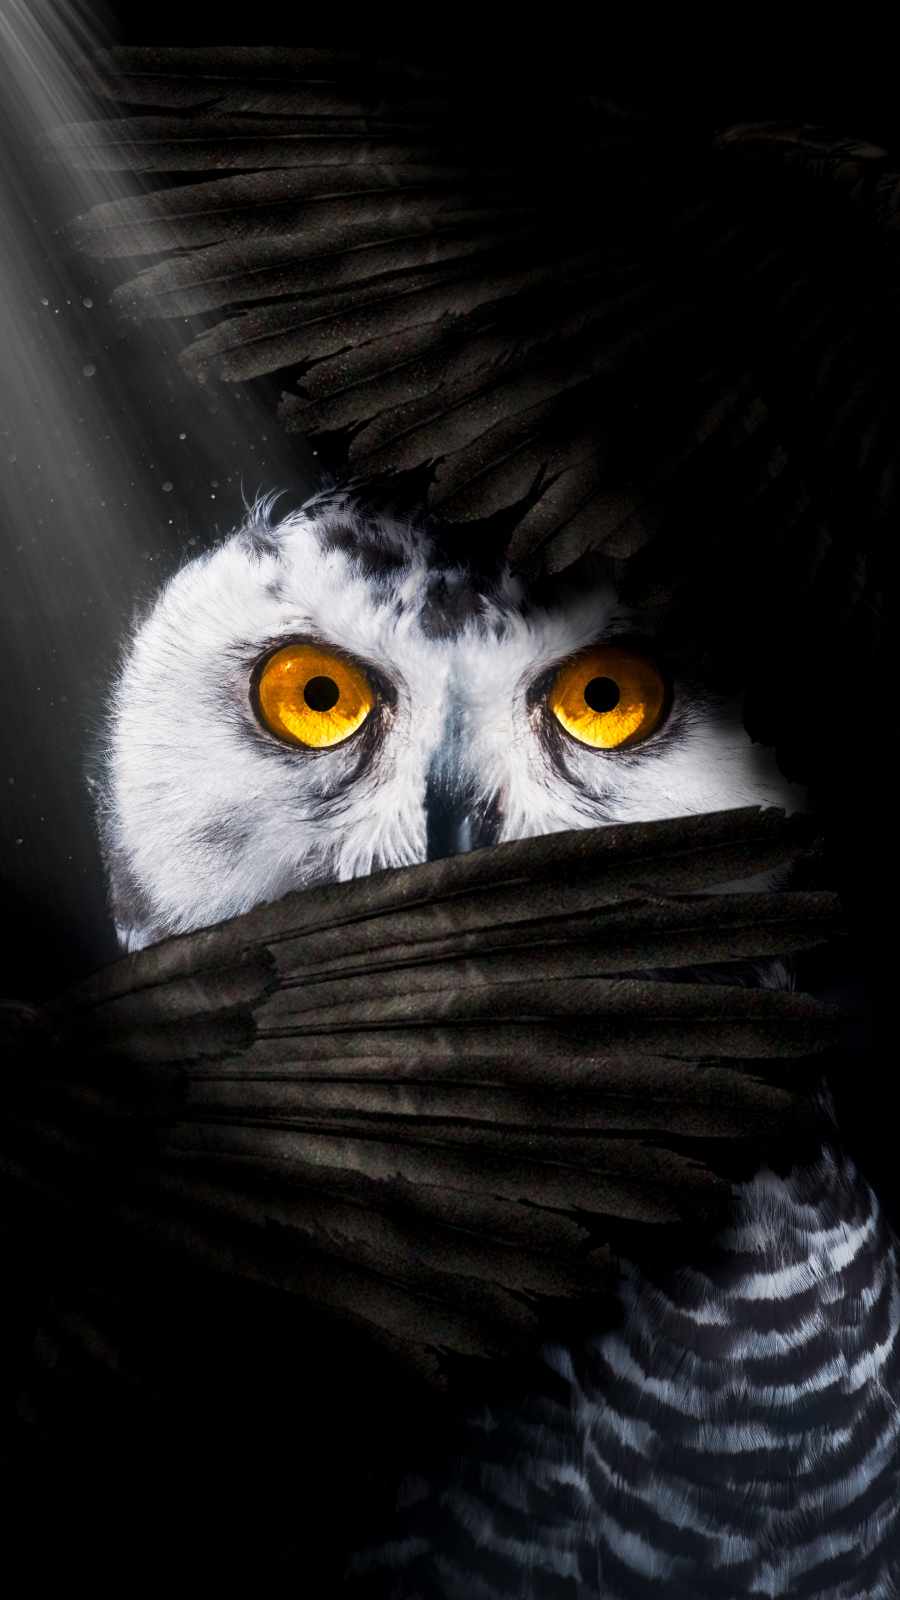 Owl Eyes IPhone Wallpaper - IPhone Wallpapers : iPhone Wallpapers